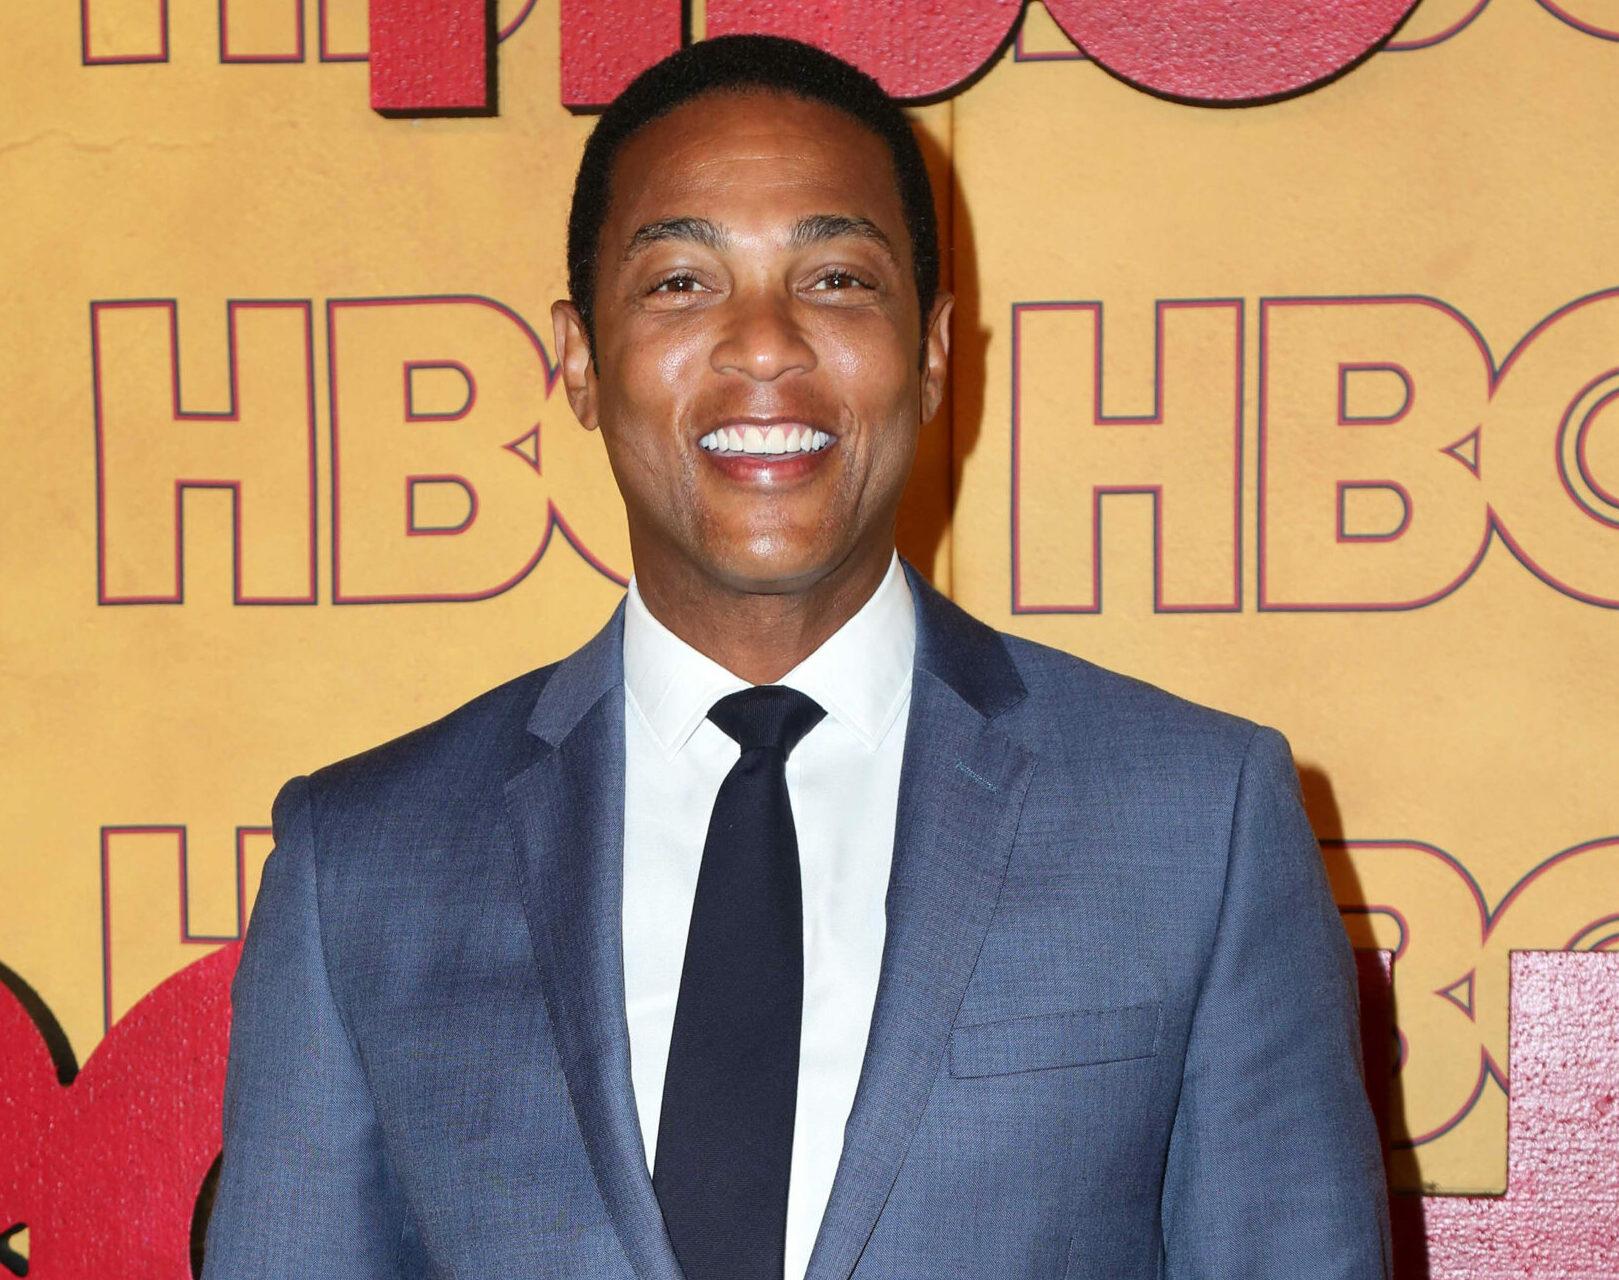 Don Lemon at the HBO After Party at Pacific Design Center on September 17, 2017 in West Hollywood, CA